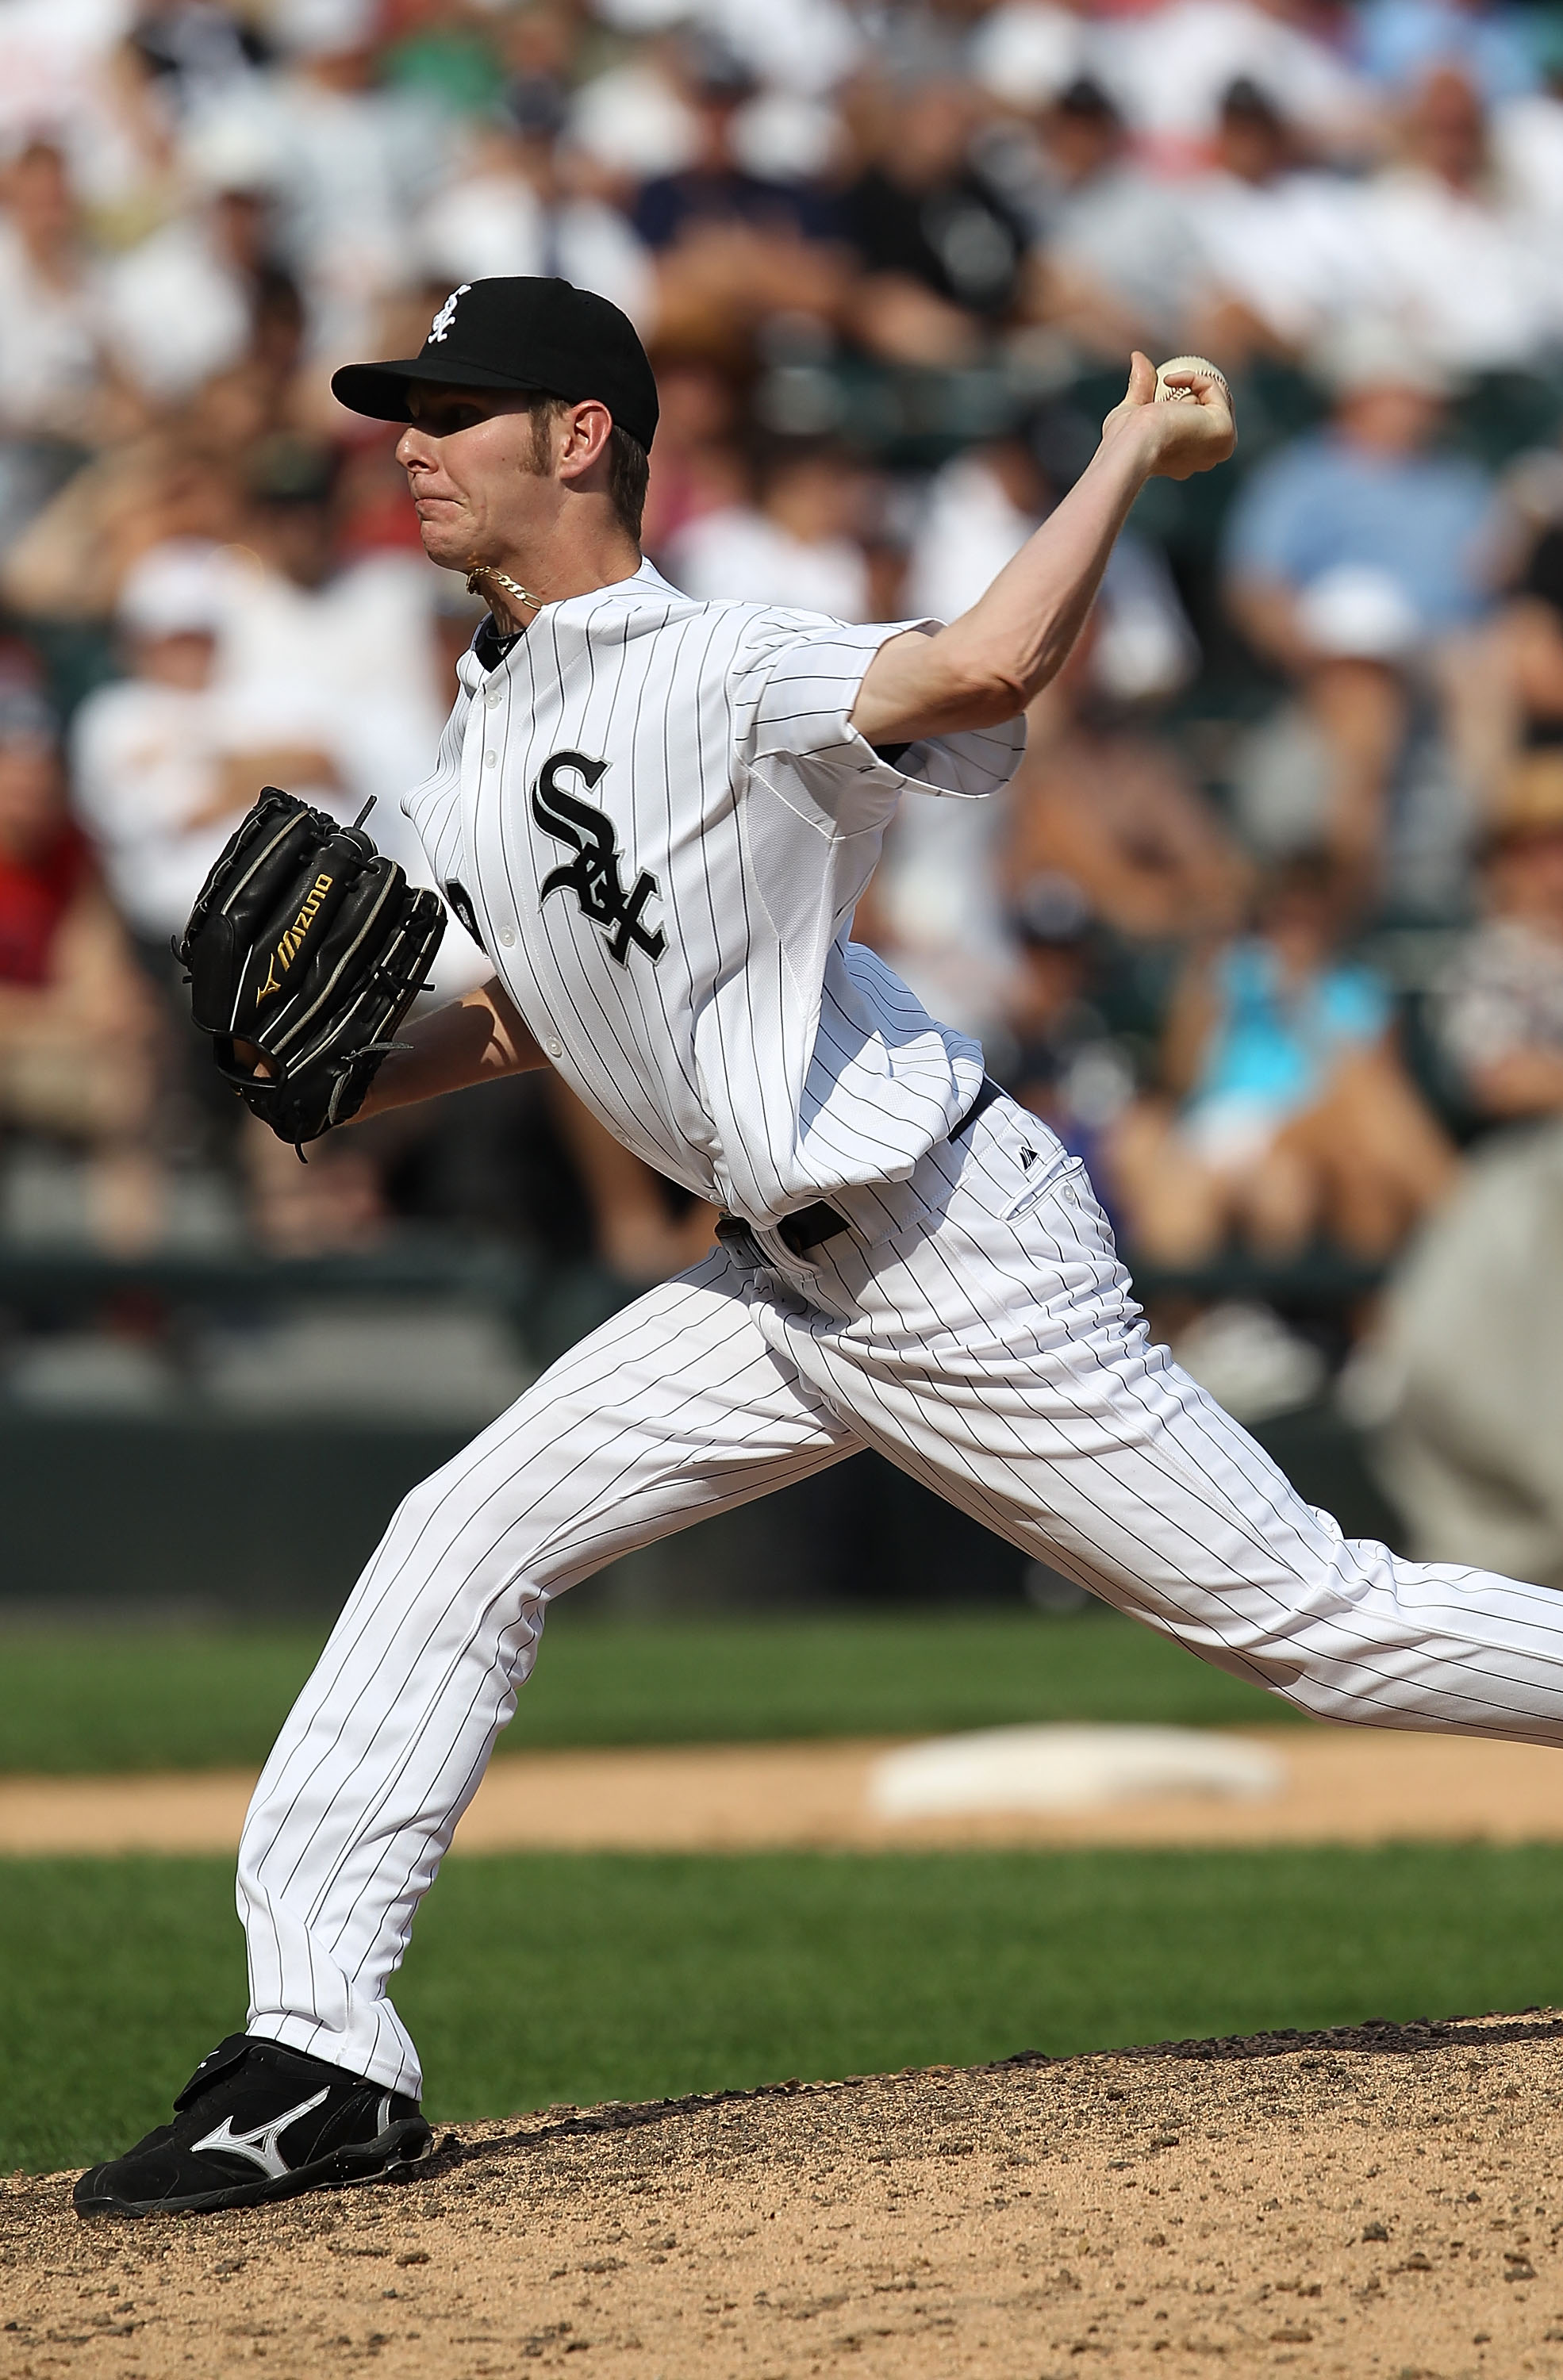 CHICAGO - AUGUST 29: Chris Sale #49 of the Chicago White Sox pitches against the New York Yankees at U.S. Cellular Field on August 29, 2010 in Chicago, Illinois. The Yankees defeated the White Sox 2-1. (Photo by Jonathan Daniel/Getty Images)